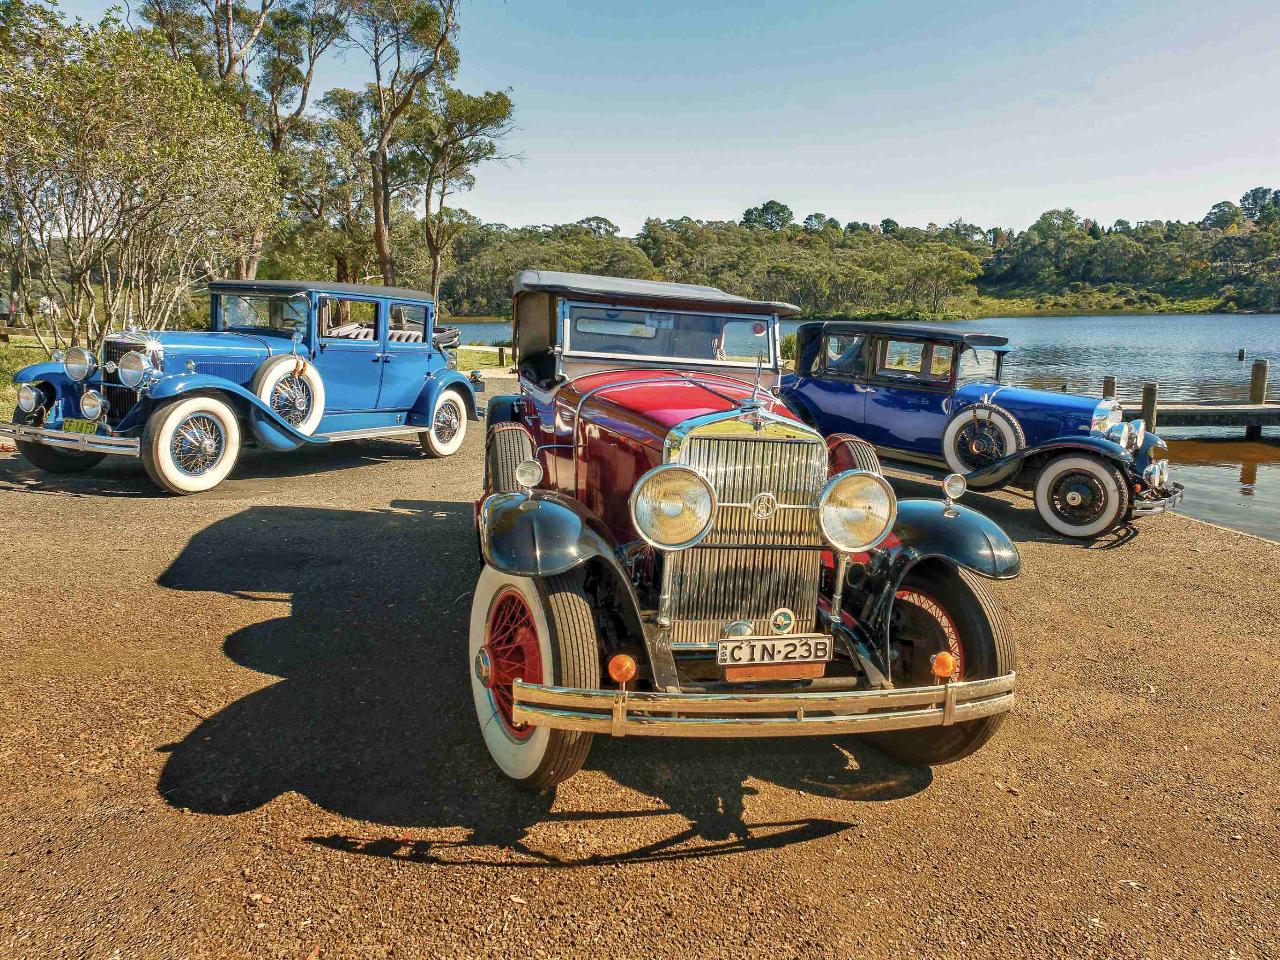 Blue Mountains Vintage Cadillac High Tea Private Tour. 3 Hour experience. Includes HIgh Tea at the magnificent Hydro Majestic Hotel. Drinks Extra. 